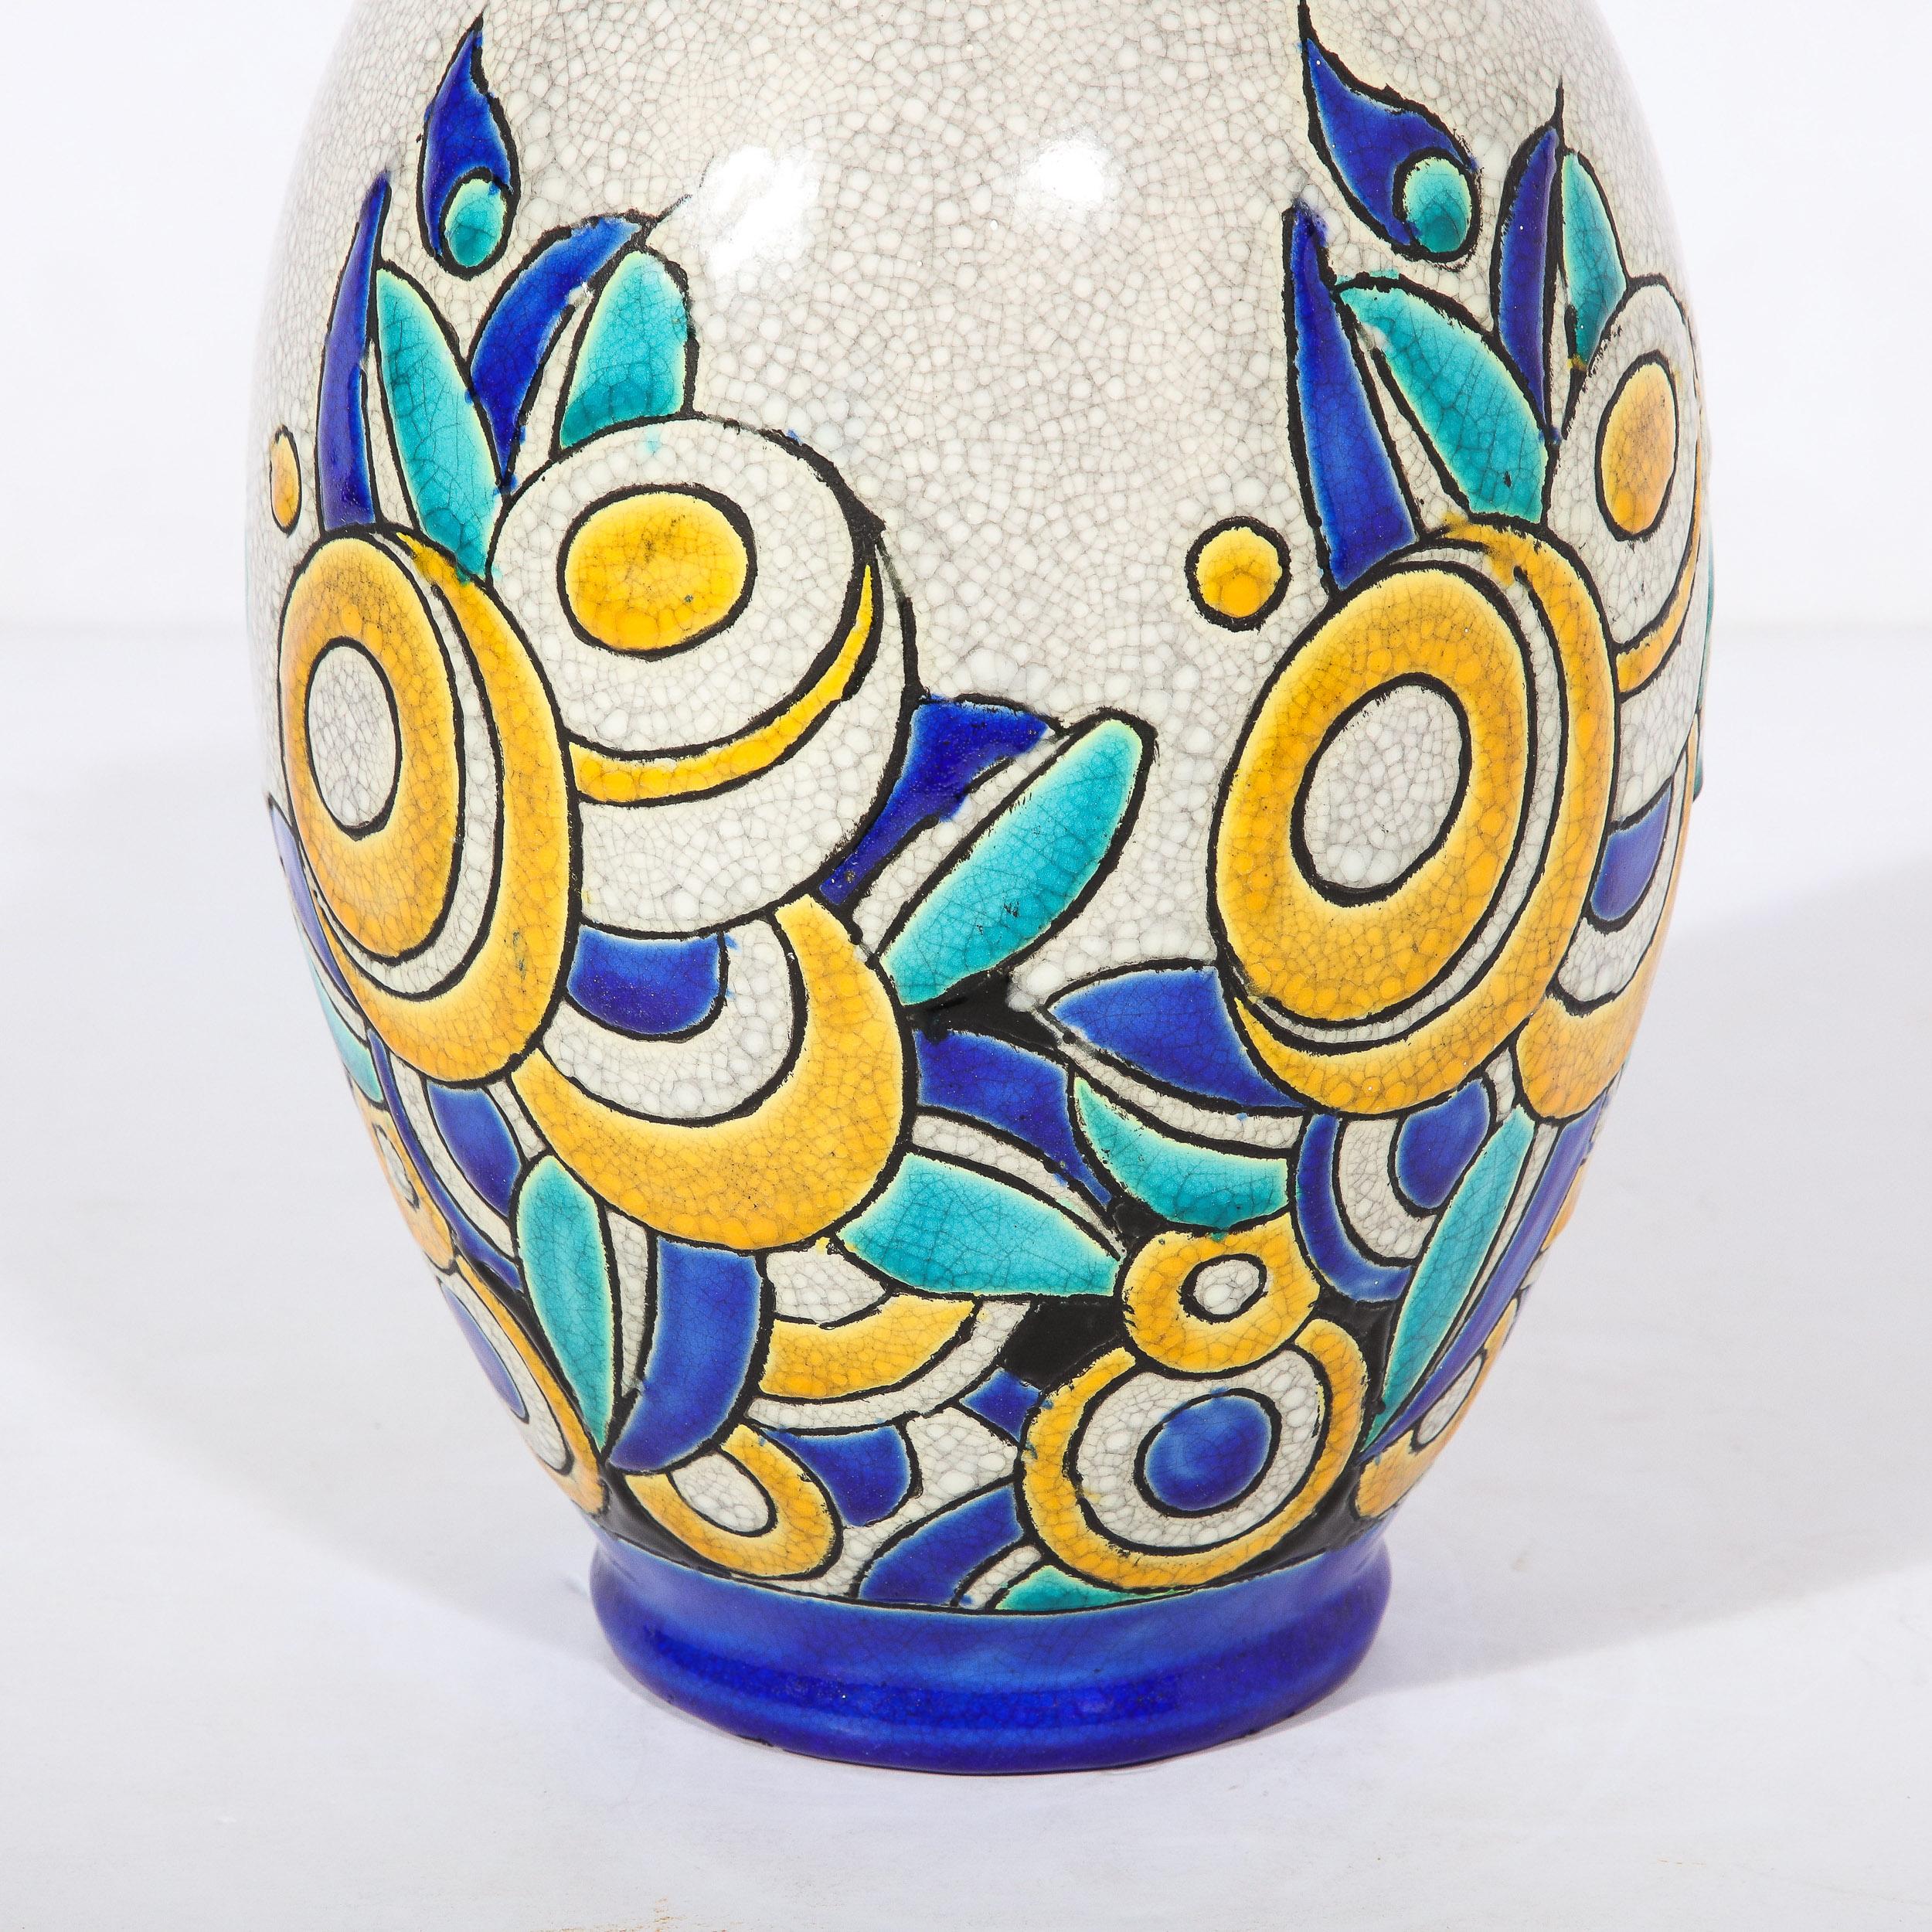 Mid-20th Century Art Deco Cubic Floral Ceramic Vase by Charles Catteau for Boch Freres Keramis For Sale